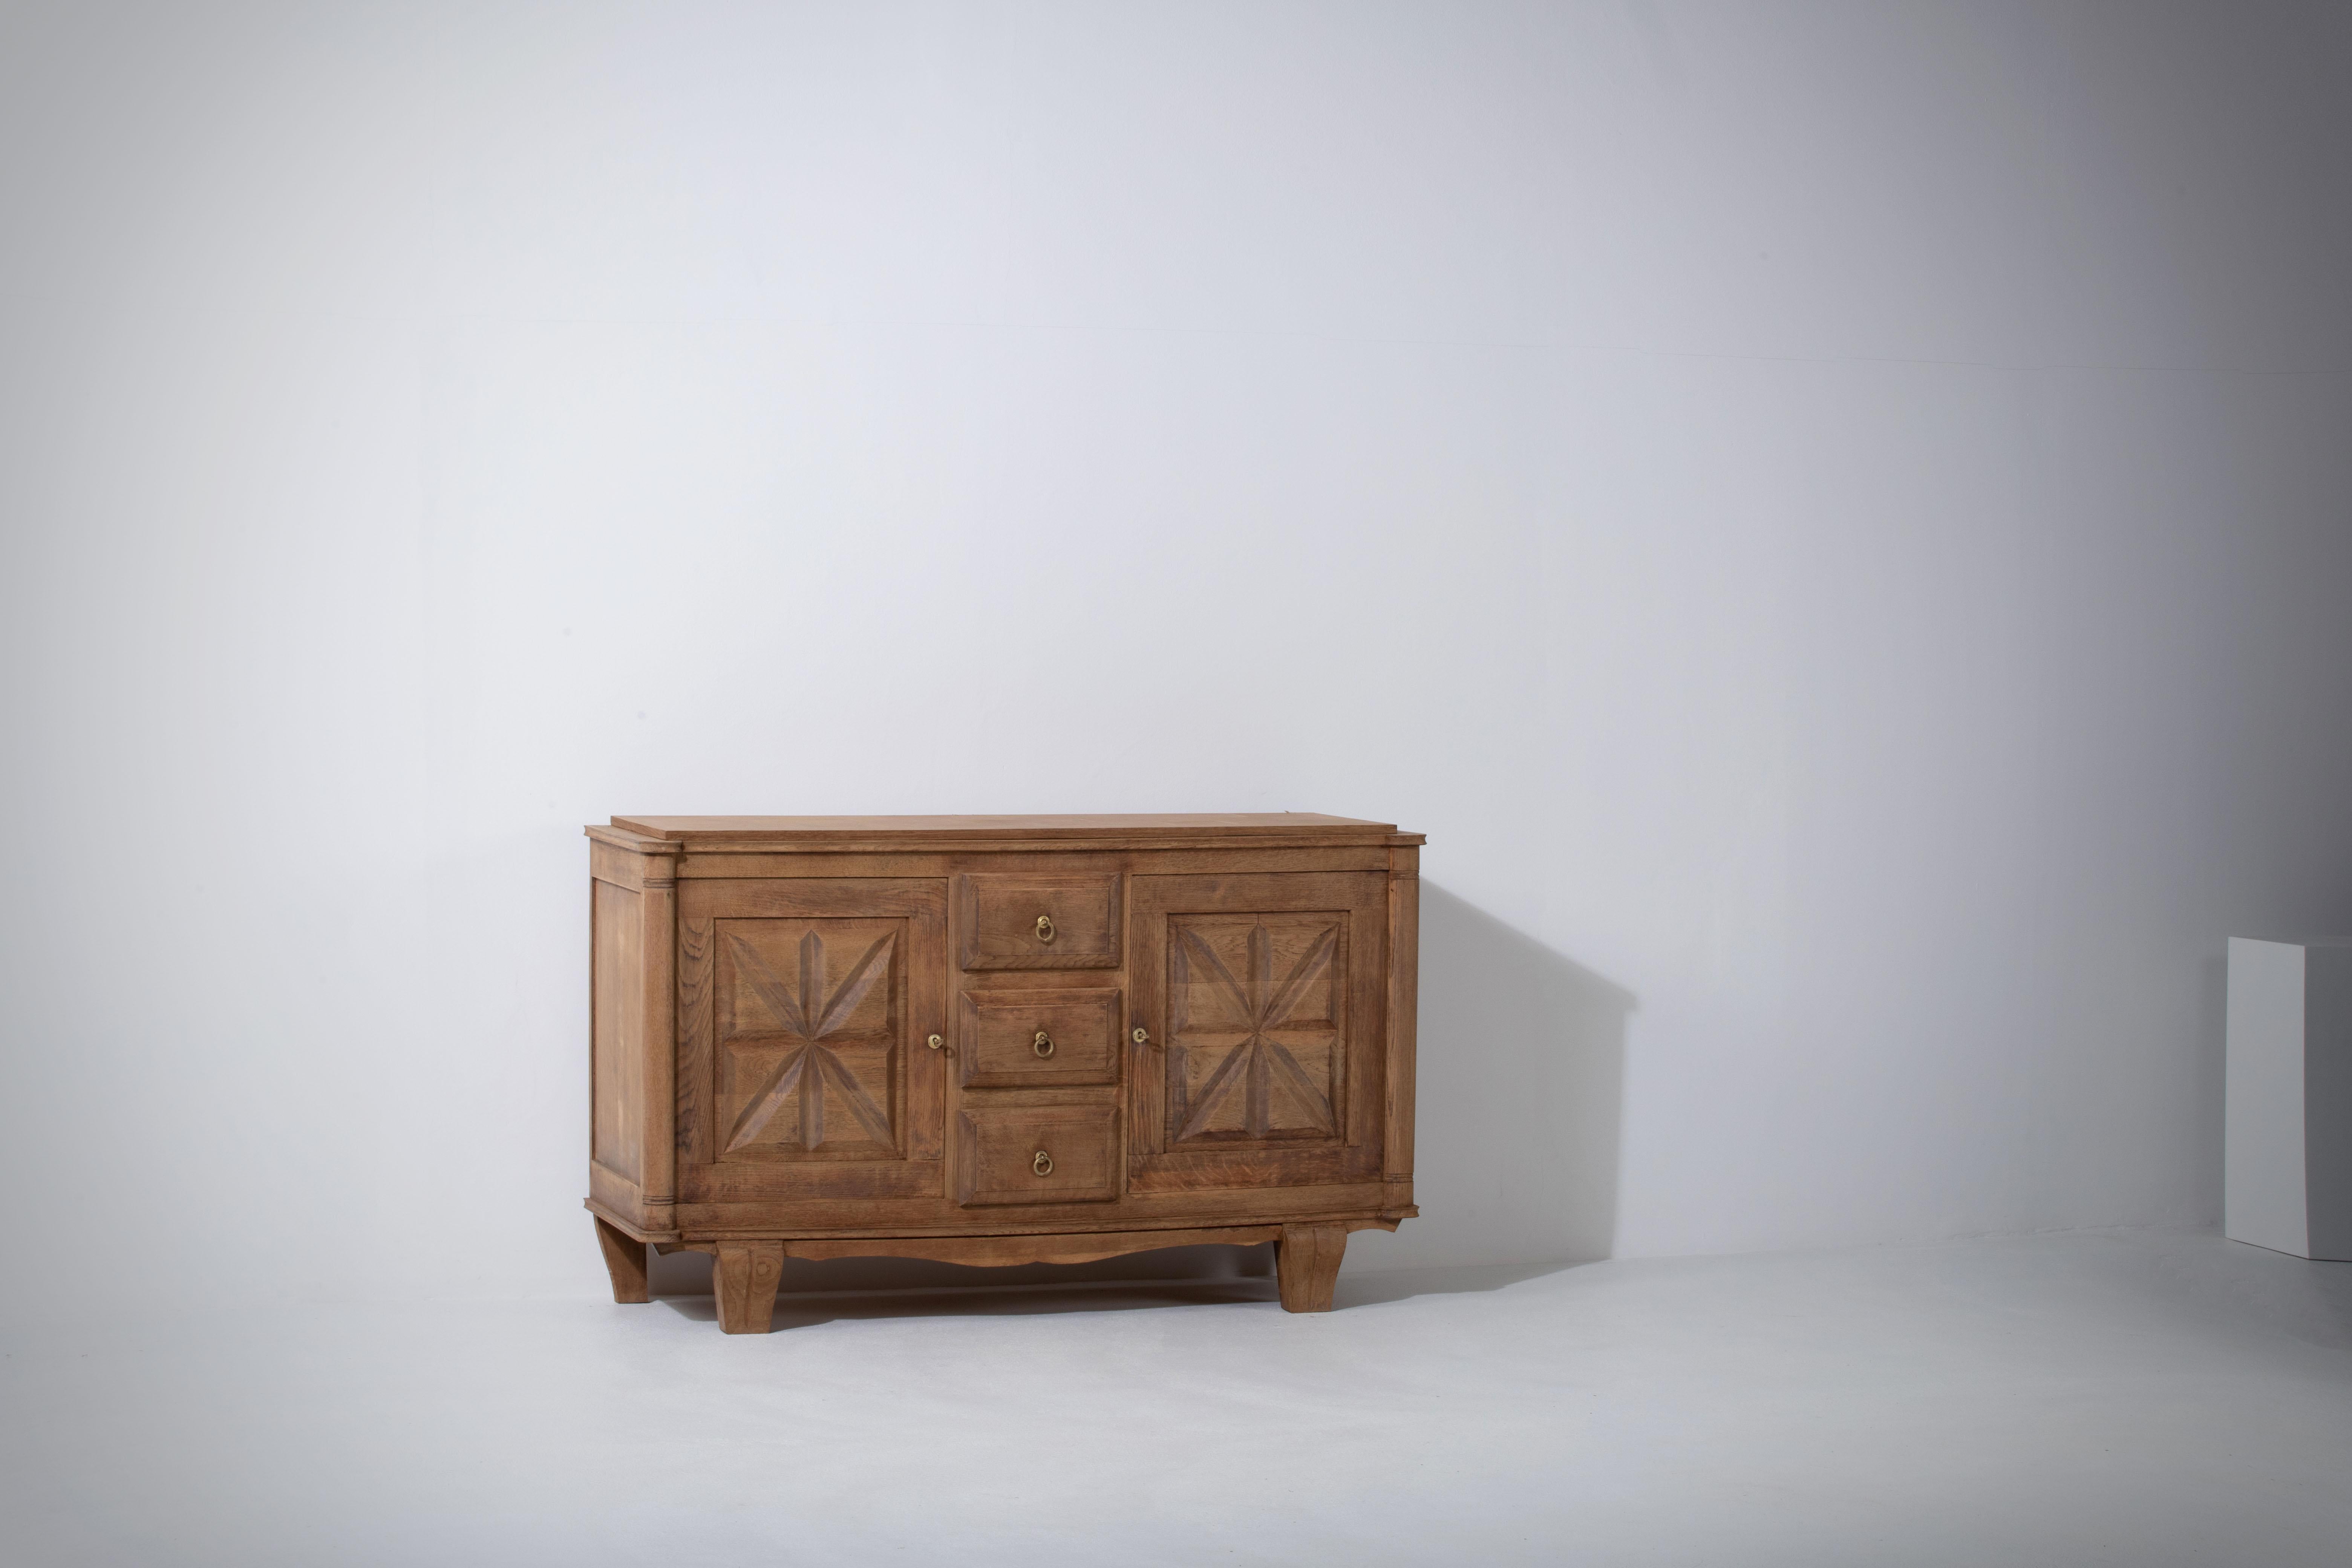 Art Deco Solid Oak Credenza with Graphic Details, France, 1940s